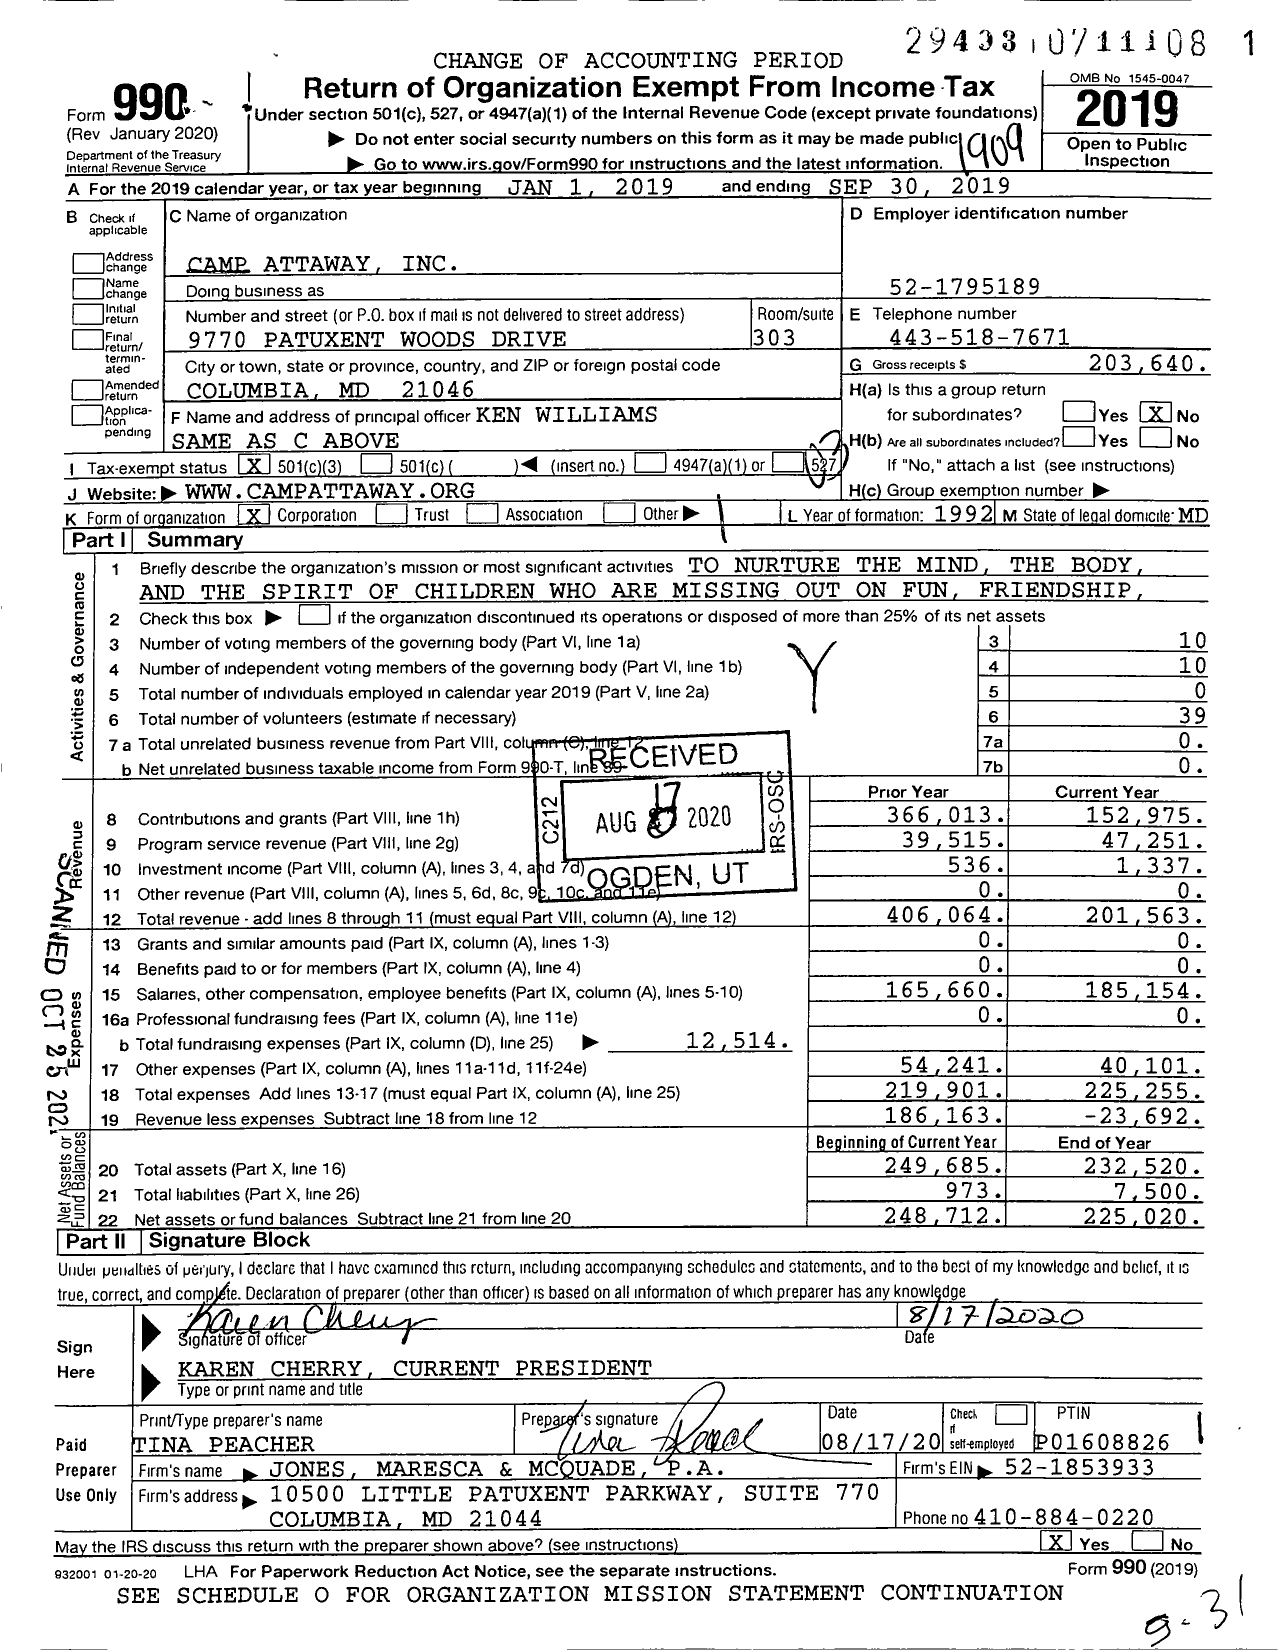 Image of first page of 2018 Form 990 for Camp Attaway